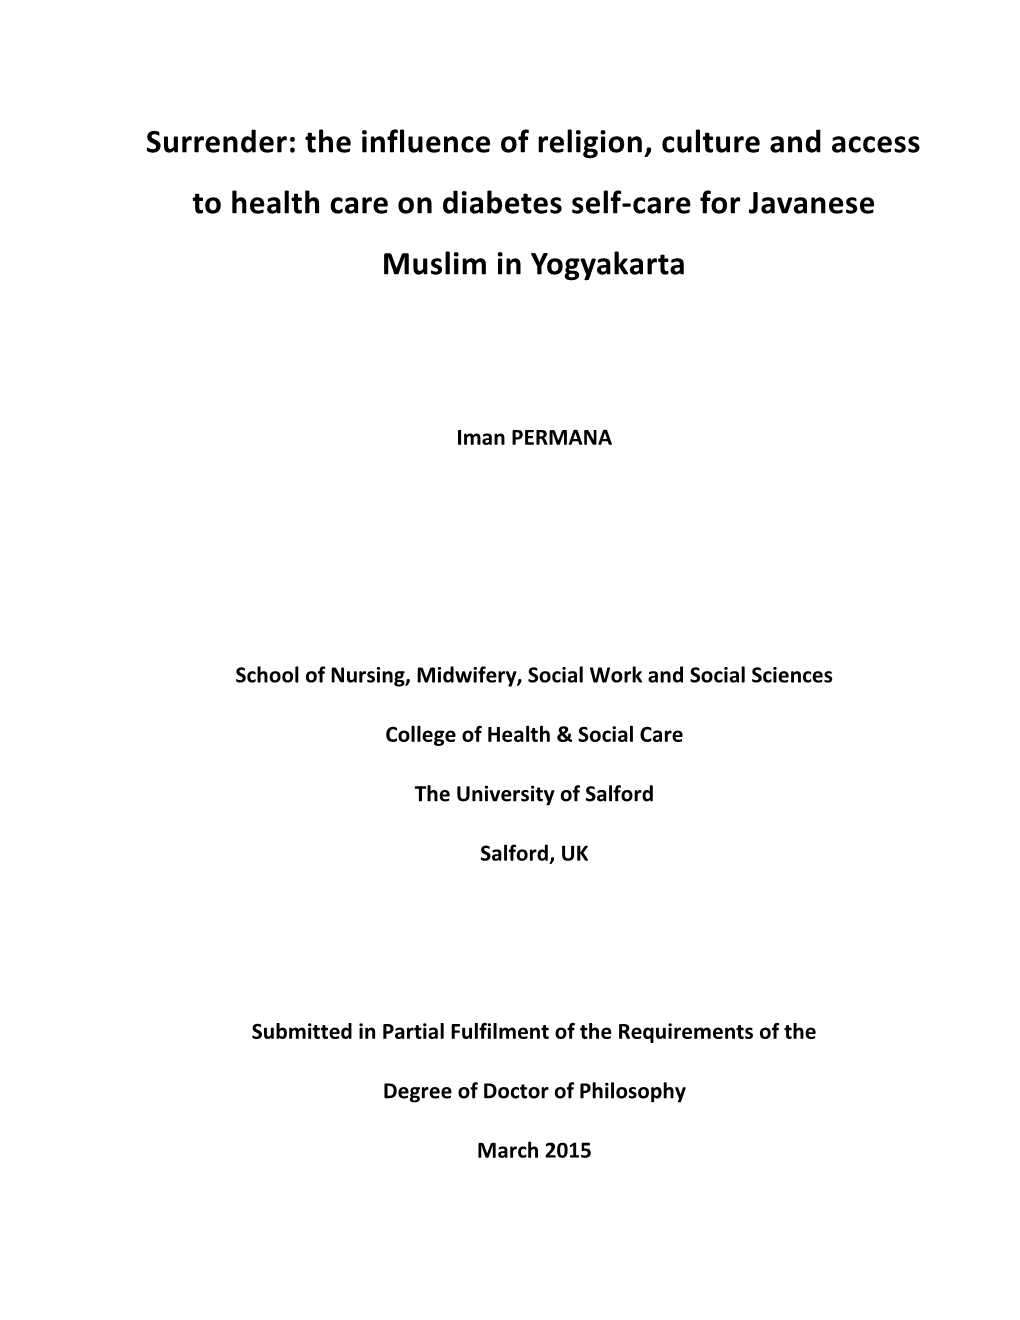 Surrender: the Influence of Religion, Culture and Access to Health Care on Diabetes Self-Care for Javanese